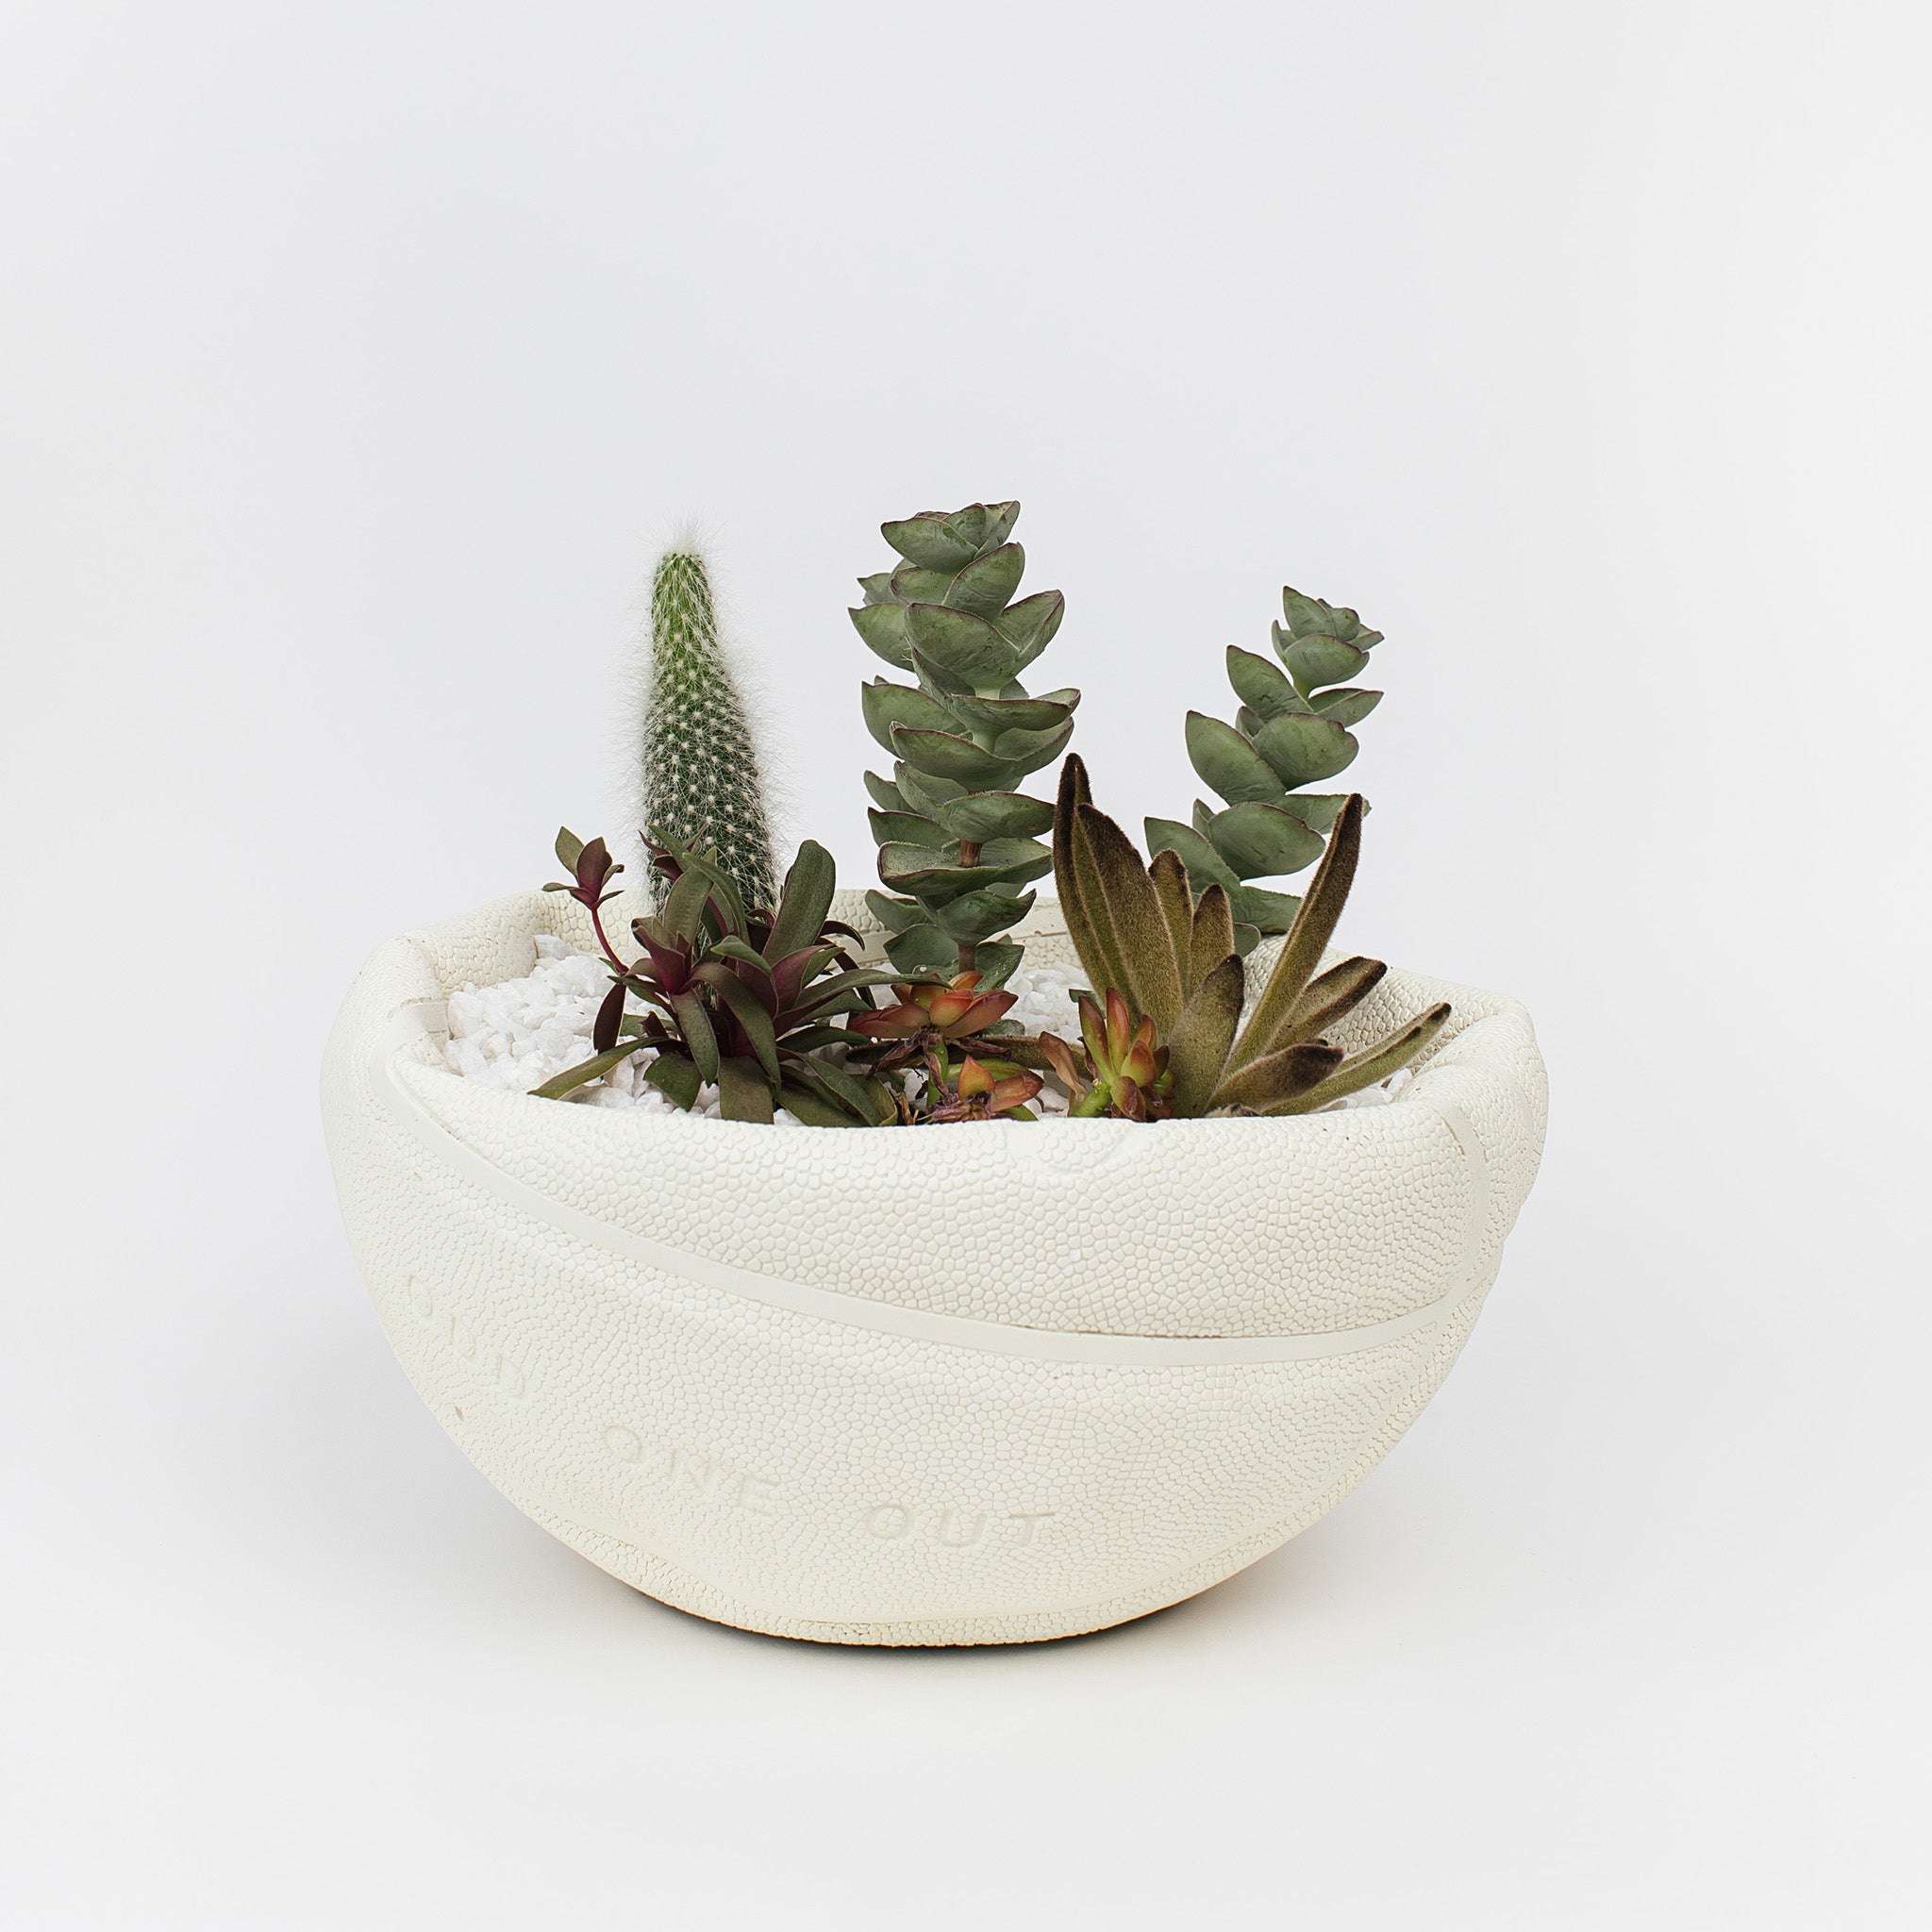 Basketball bowl stone planter with succulents and cactus